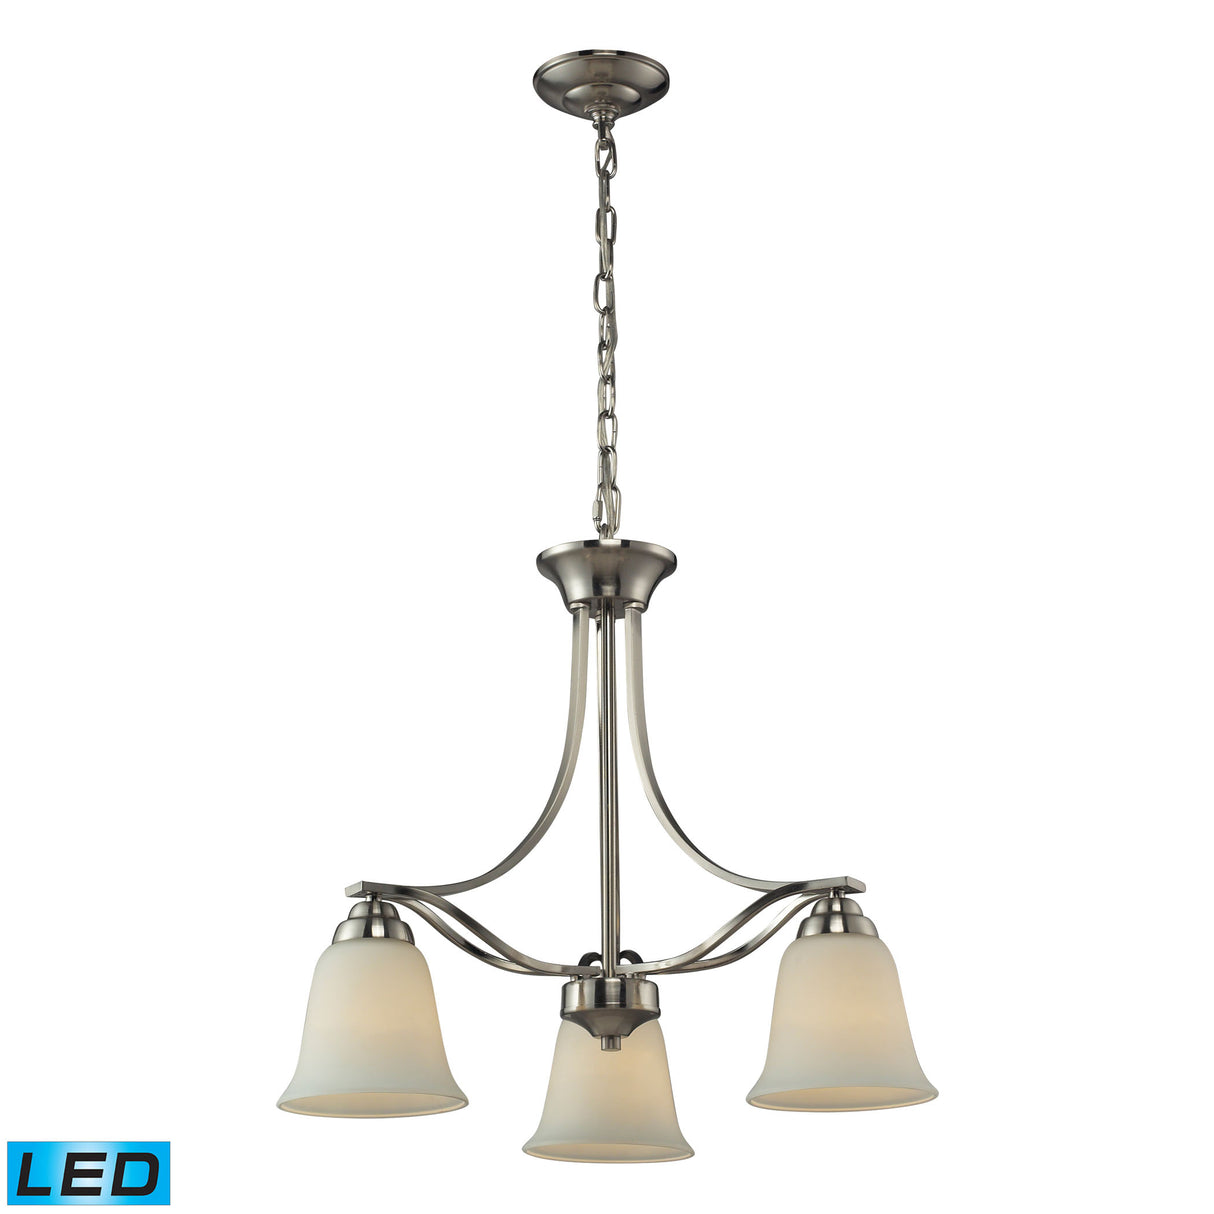 Elk 11522/3-LED Malaga 3 Light Chandelier in Brushed Nickel - LED, 800 Lumens (2400 Lumens Total) with Full Scale Di